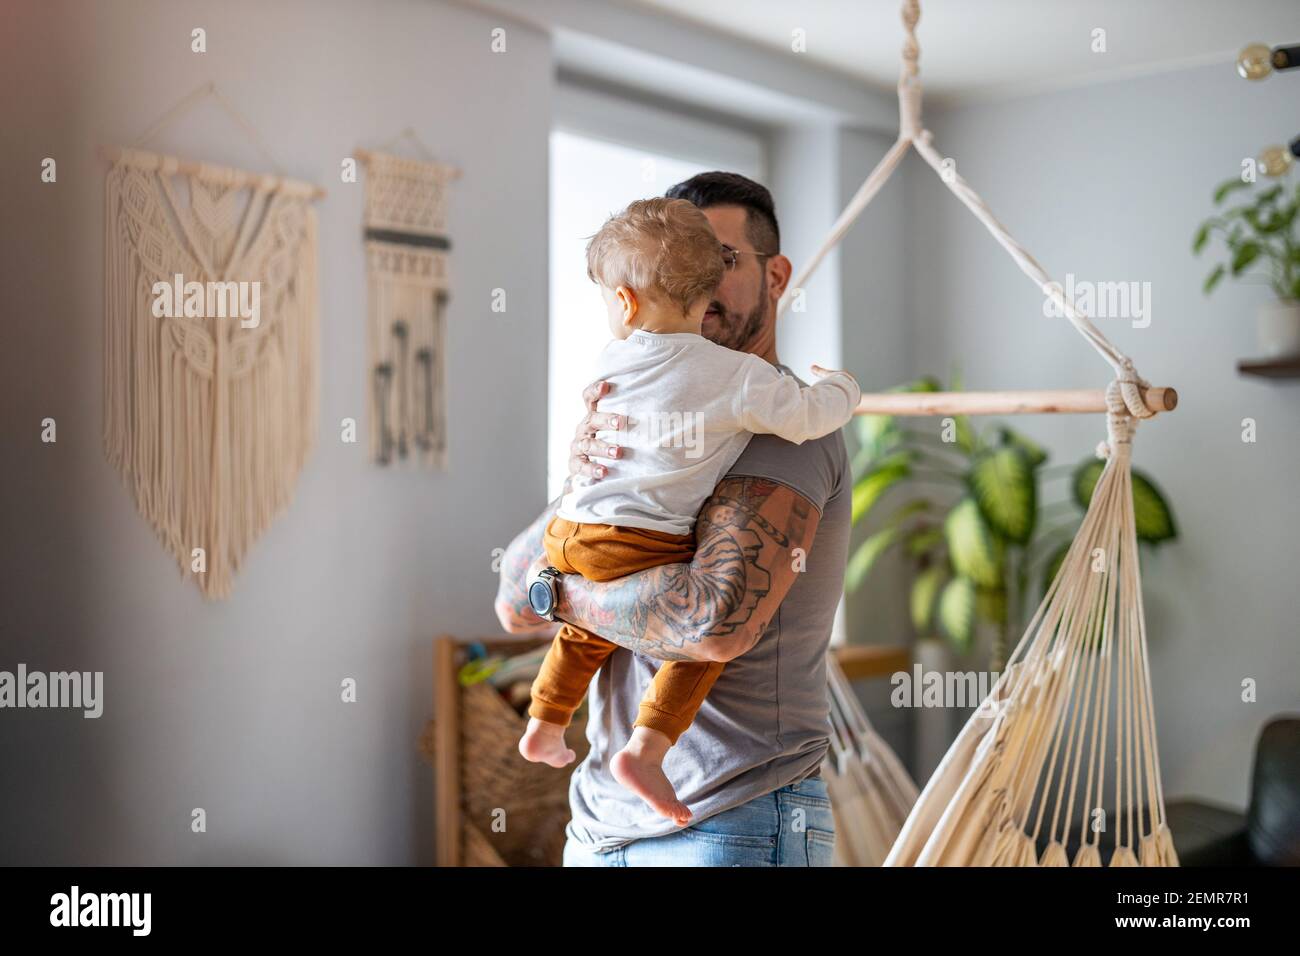 Father looking after his small son at home Stock Photo